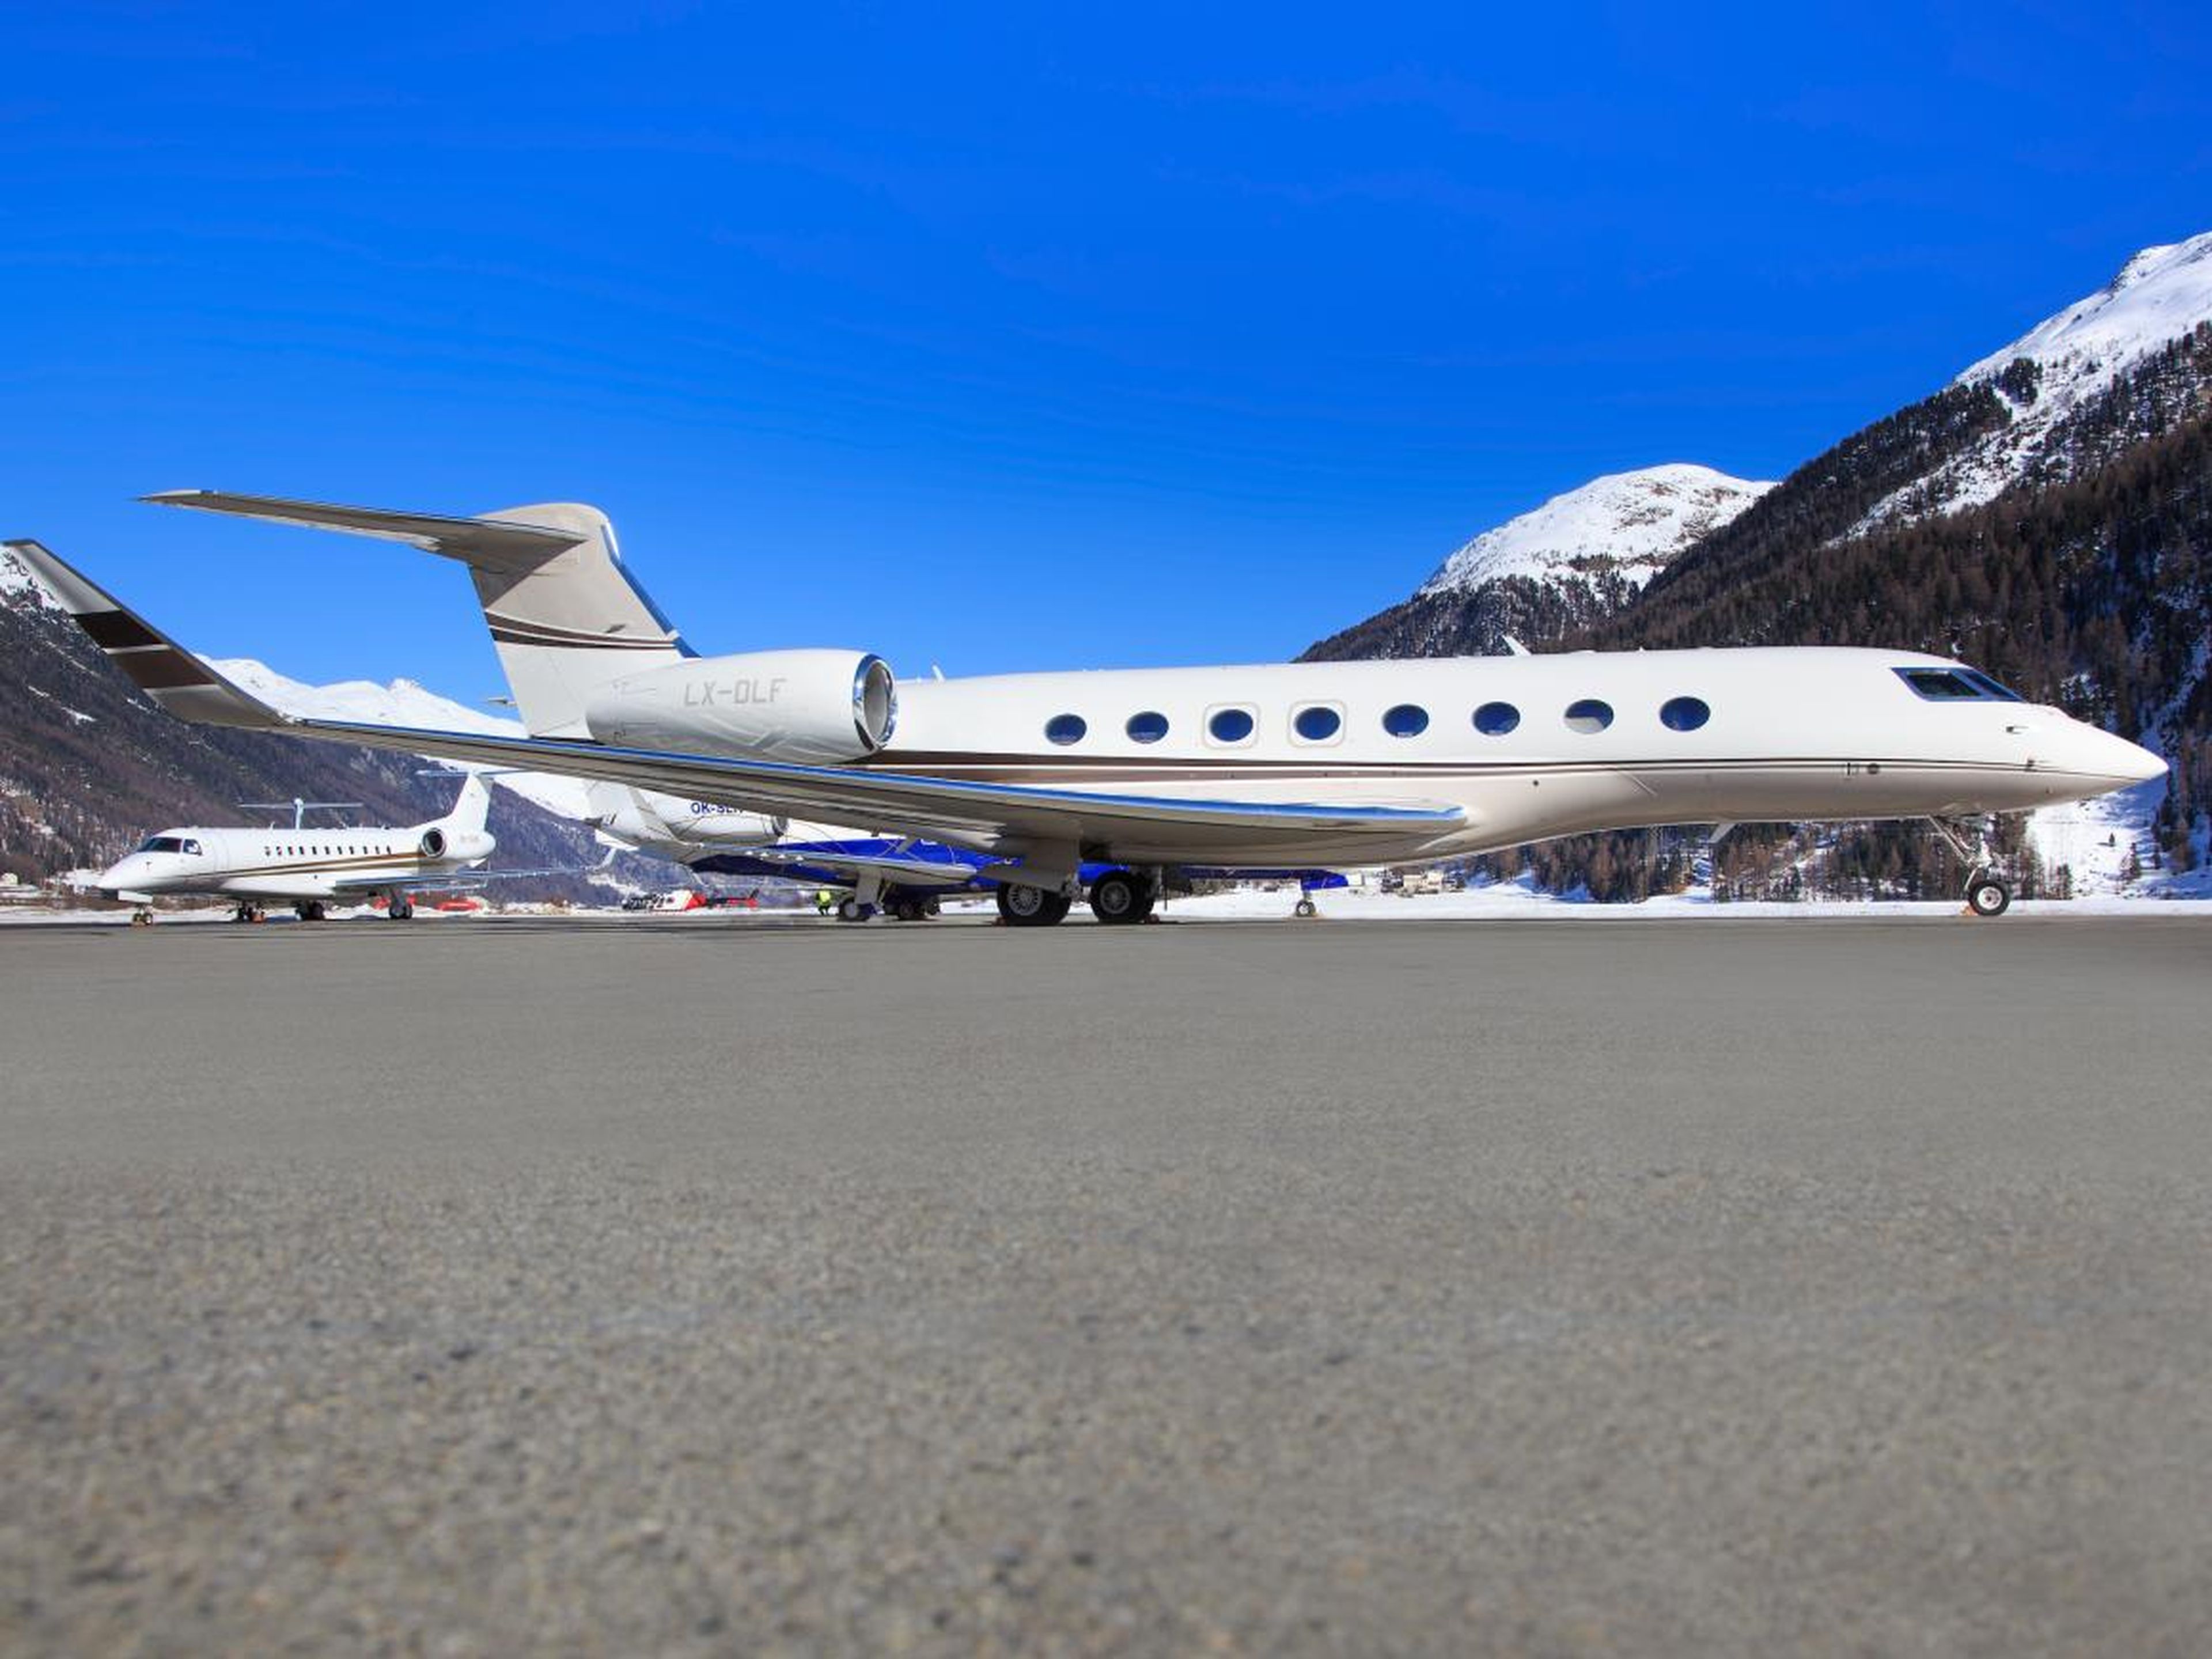 The G550 was later supplanted as Gulfstream's flagship model by the G650 in 2008 and the G650ER in 2014.